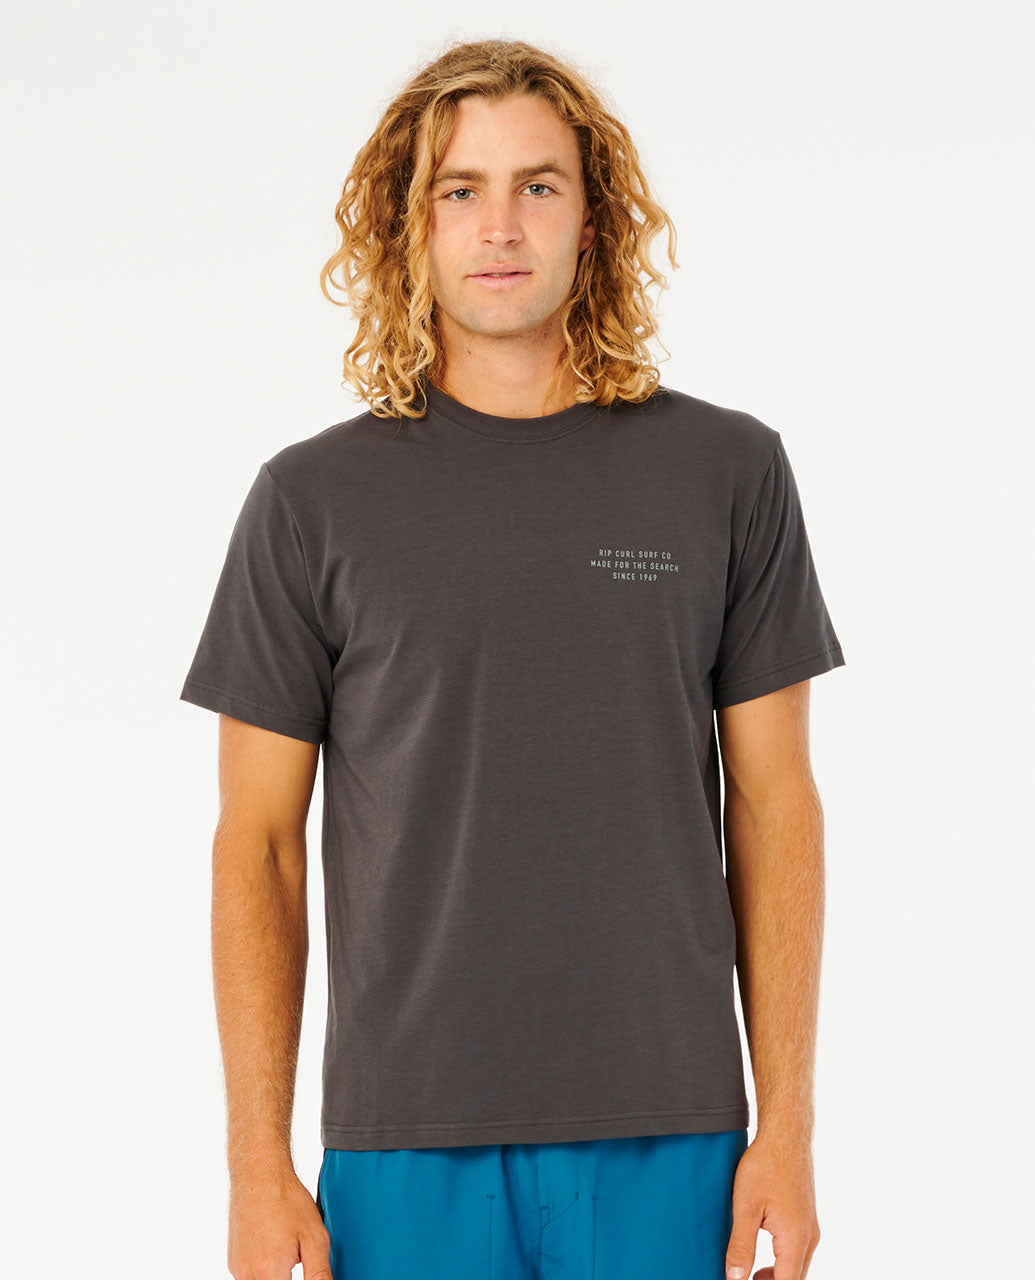 VaporCool Prepare Tee - Surf Clothing for mens – Rip Curl Indonesia